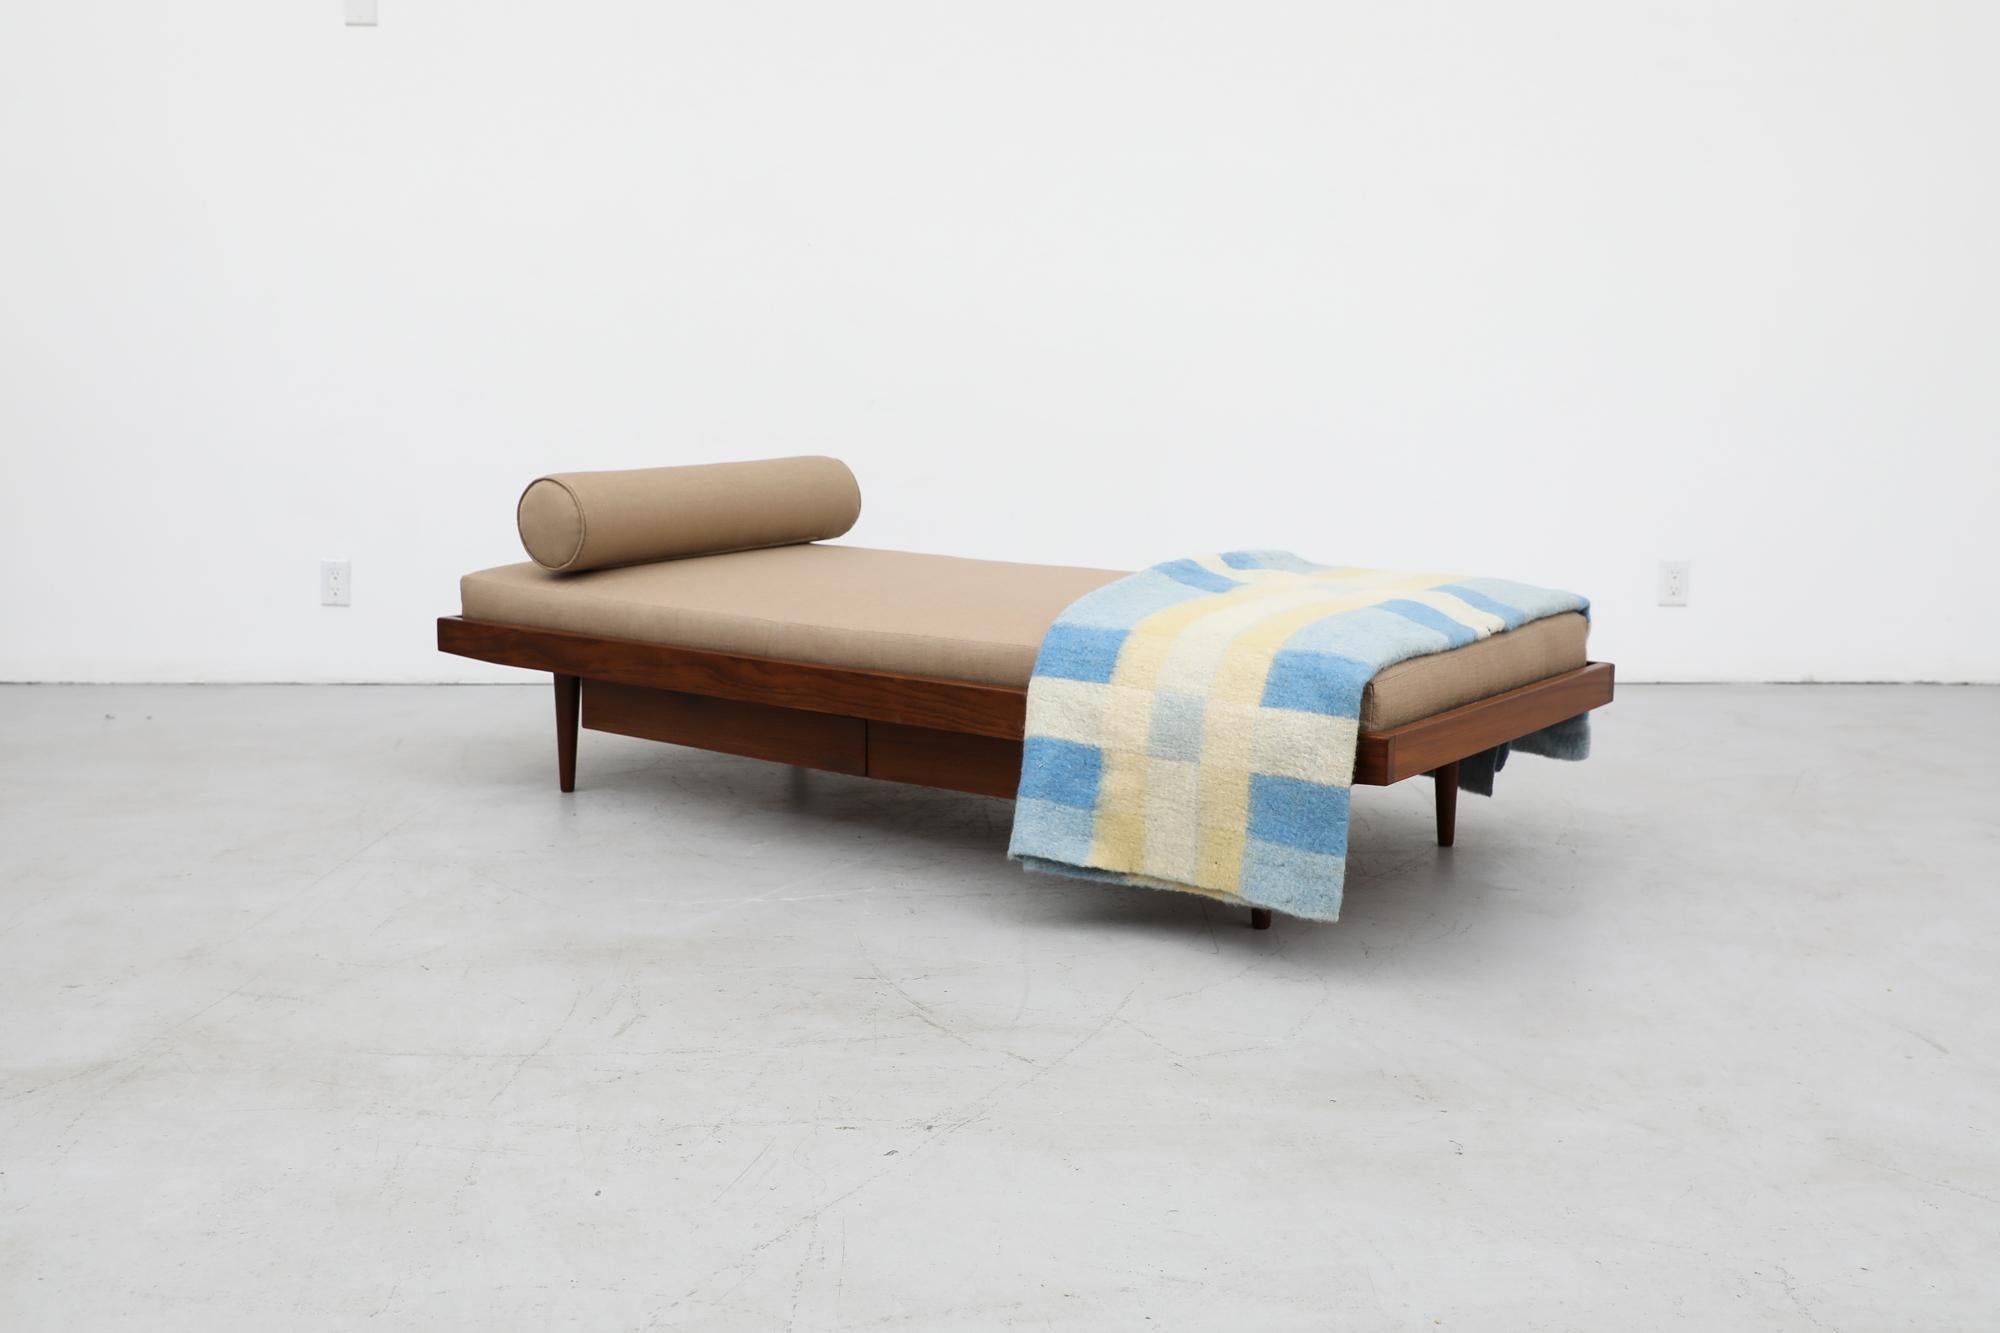 daybed with drawers